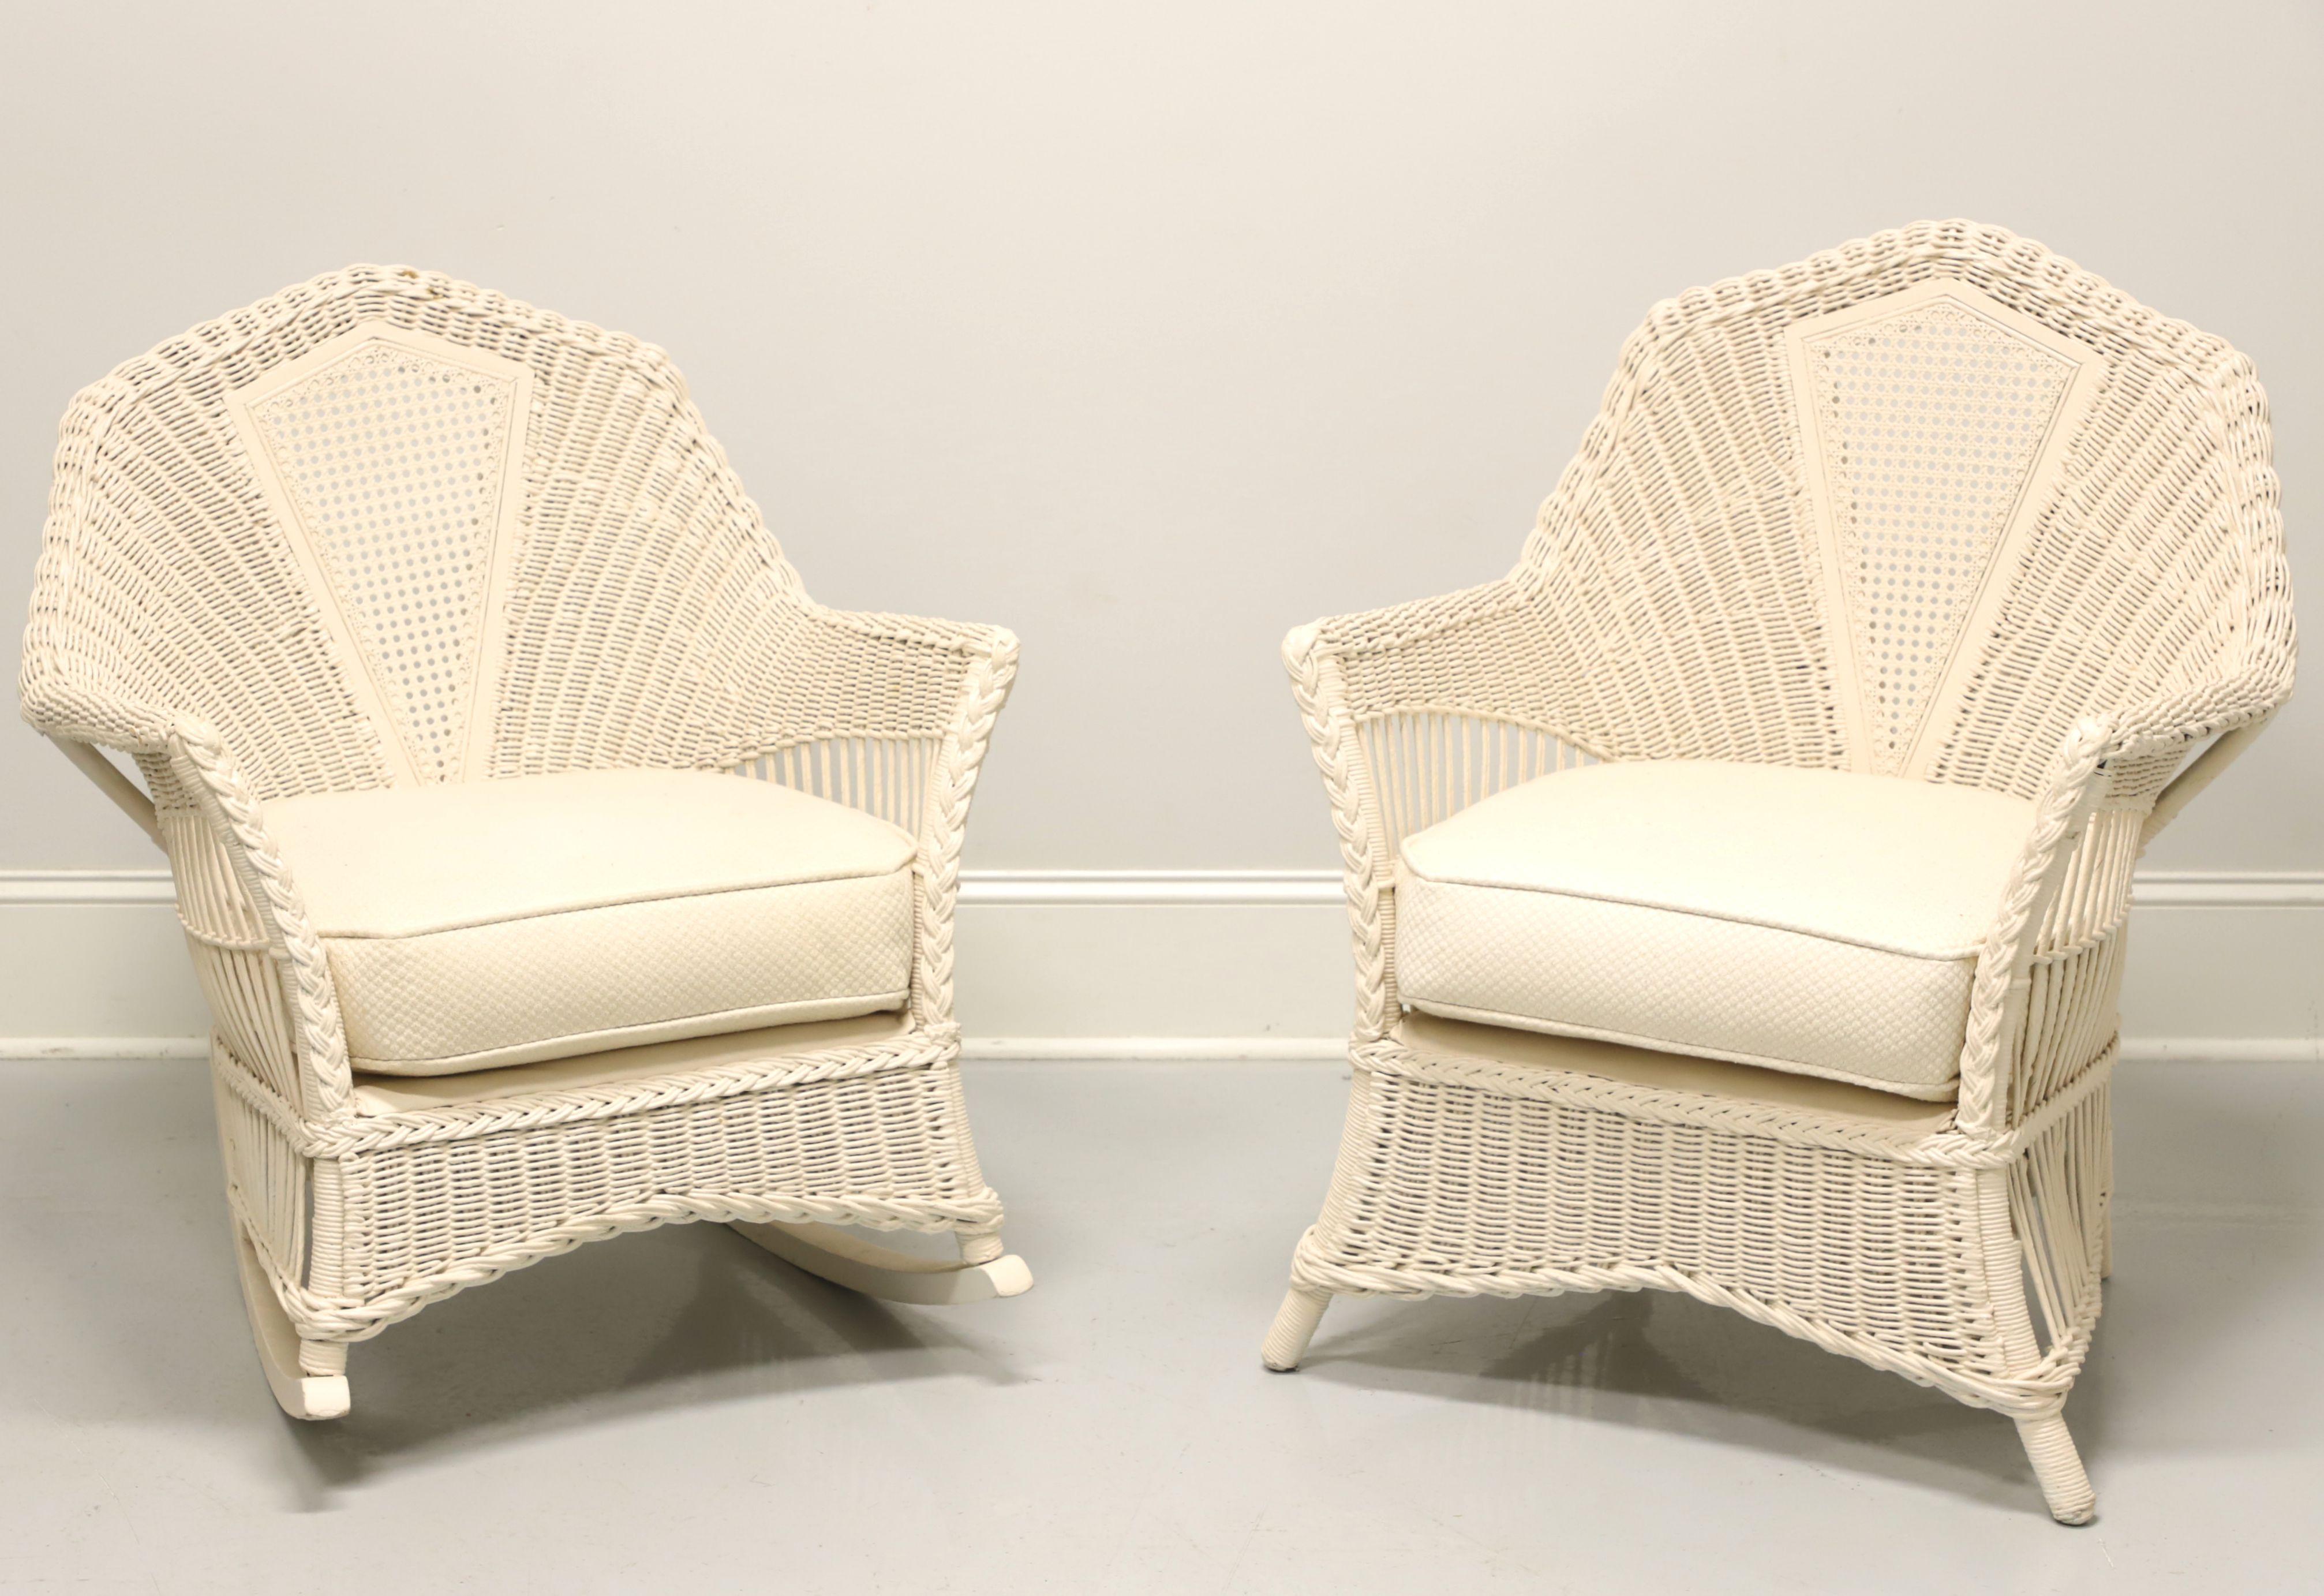 Antique Victorian White Painted Wicker Chair and Rocker - Pair 5